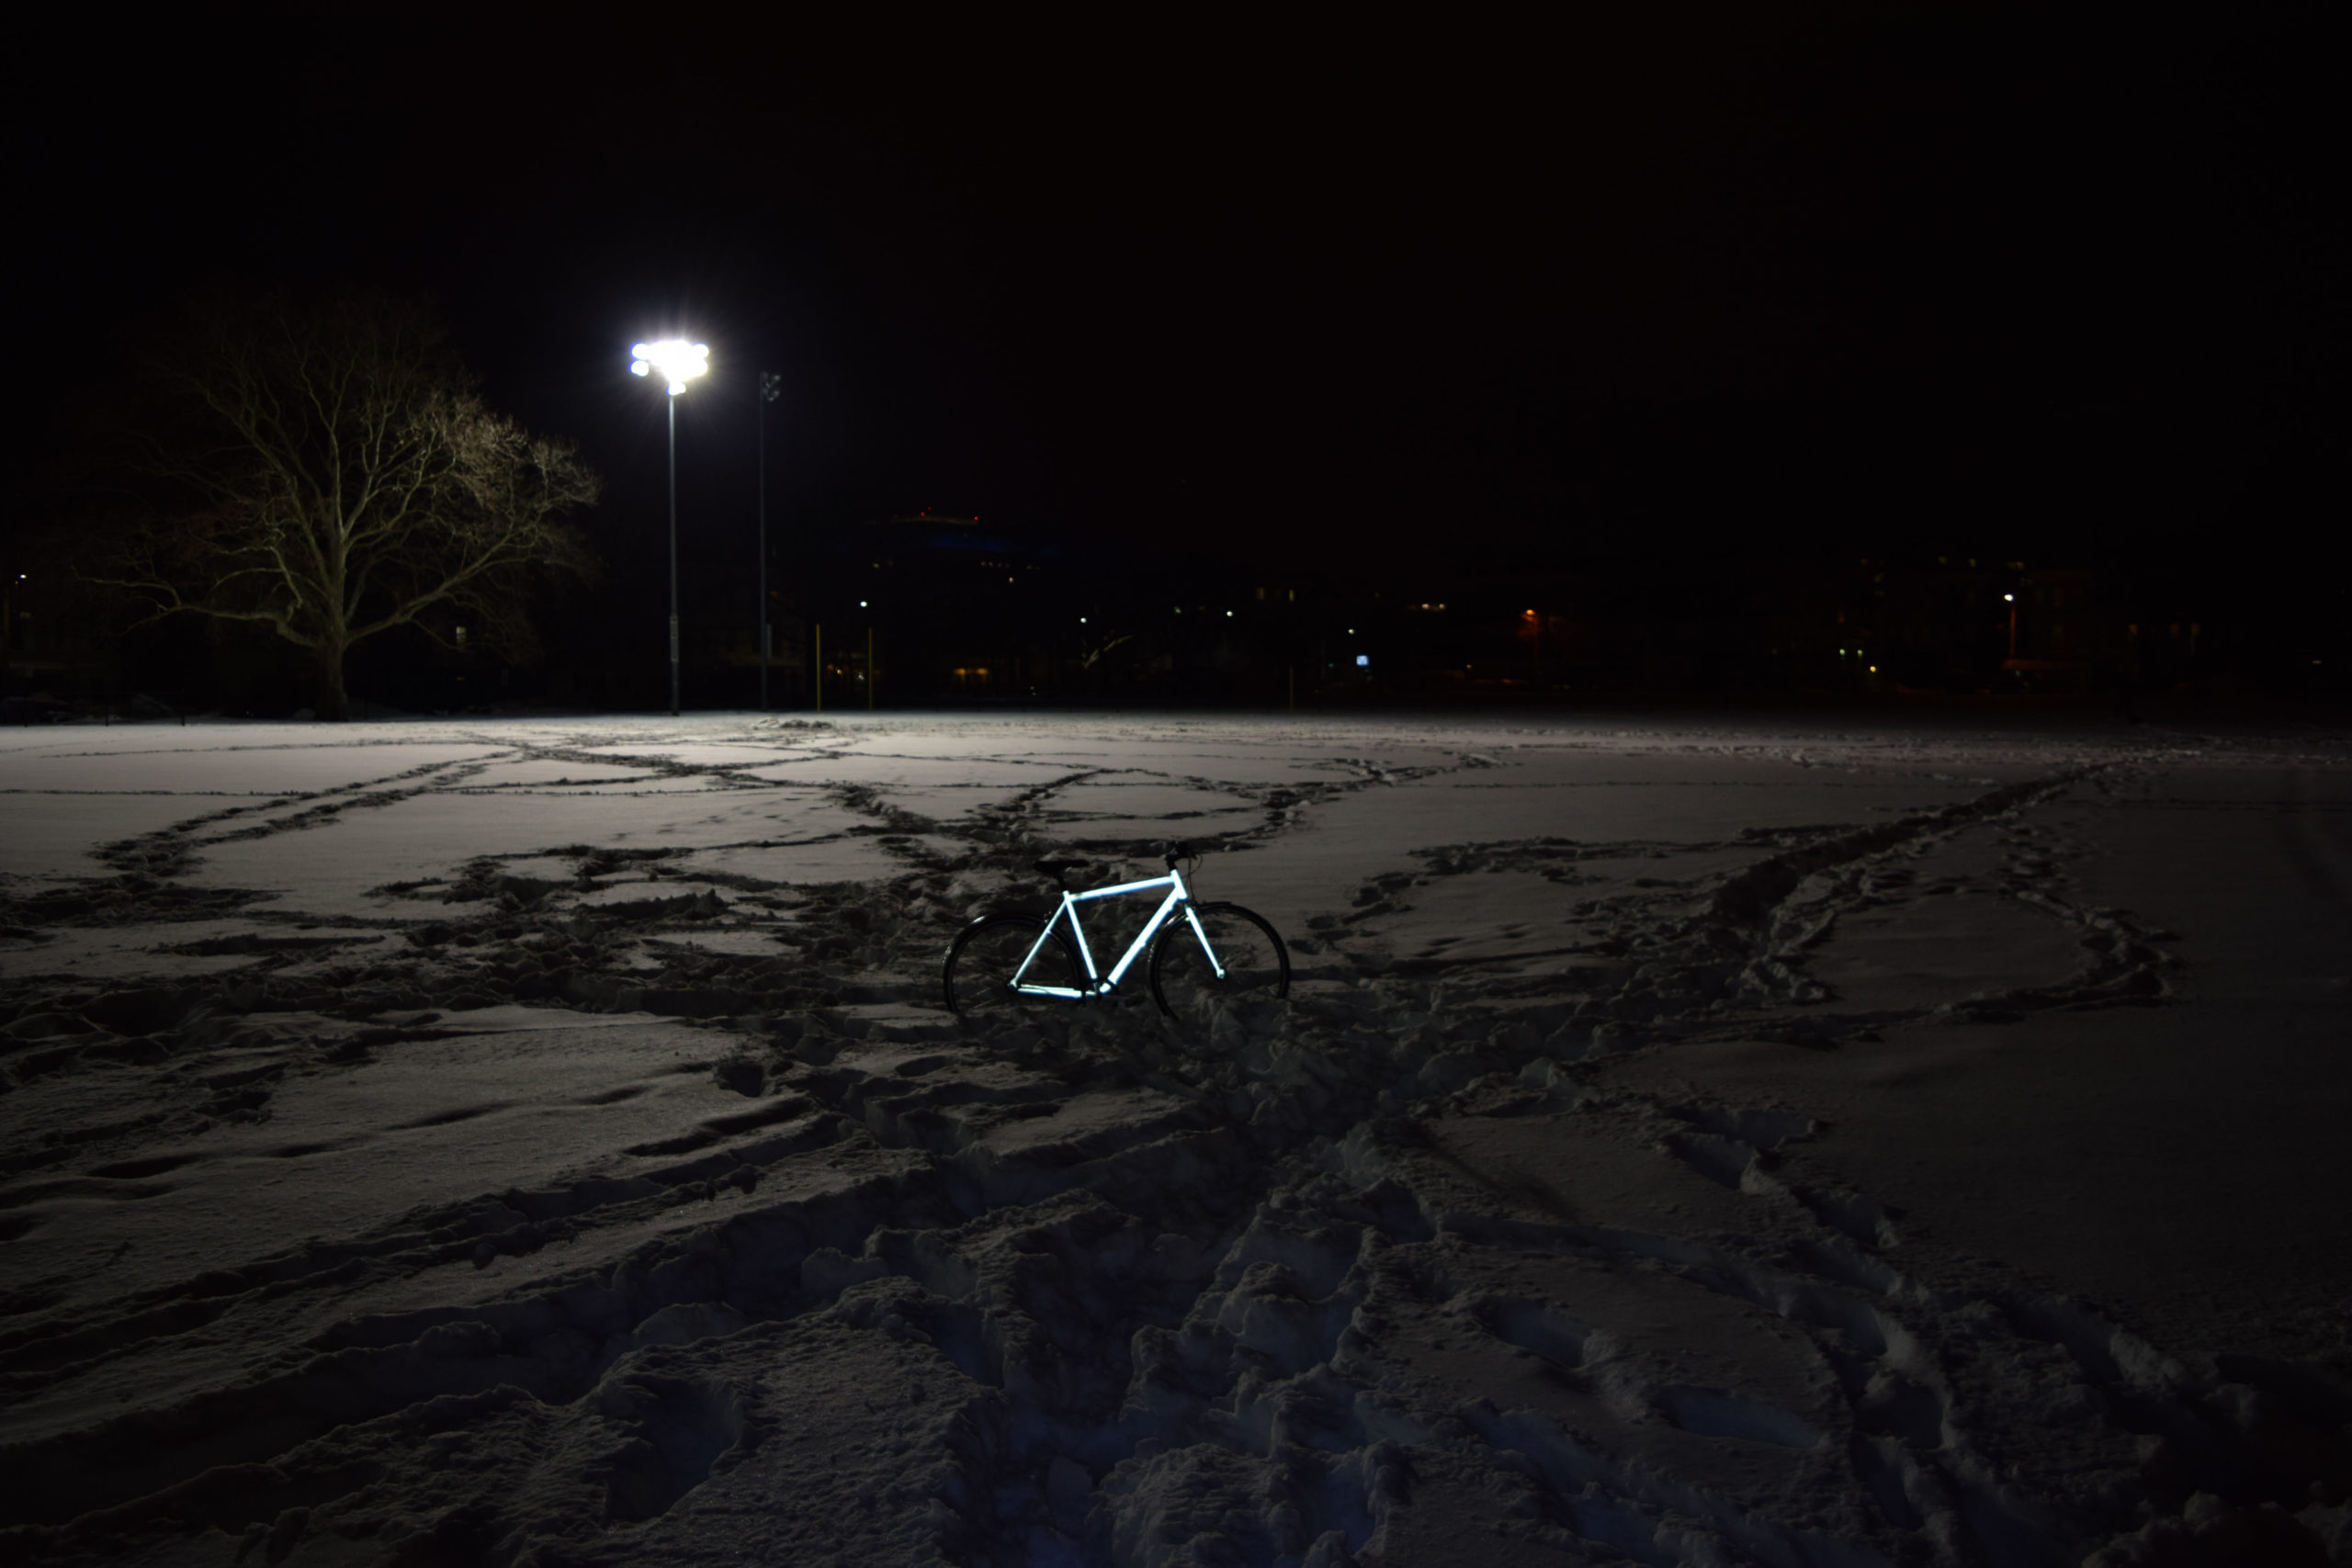 Turn Your Bike Into A Glowing Beacon With Reflective Street Sign Paint